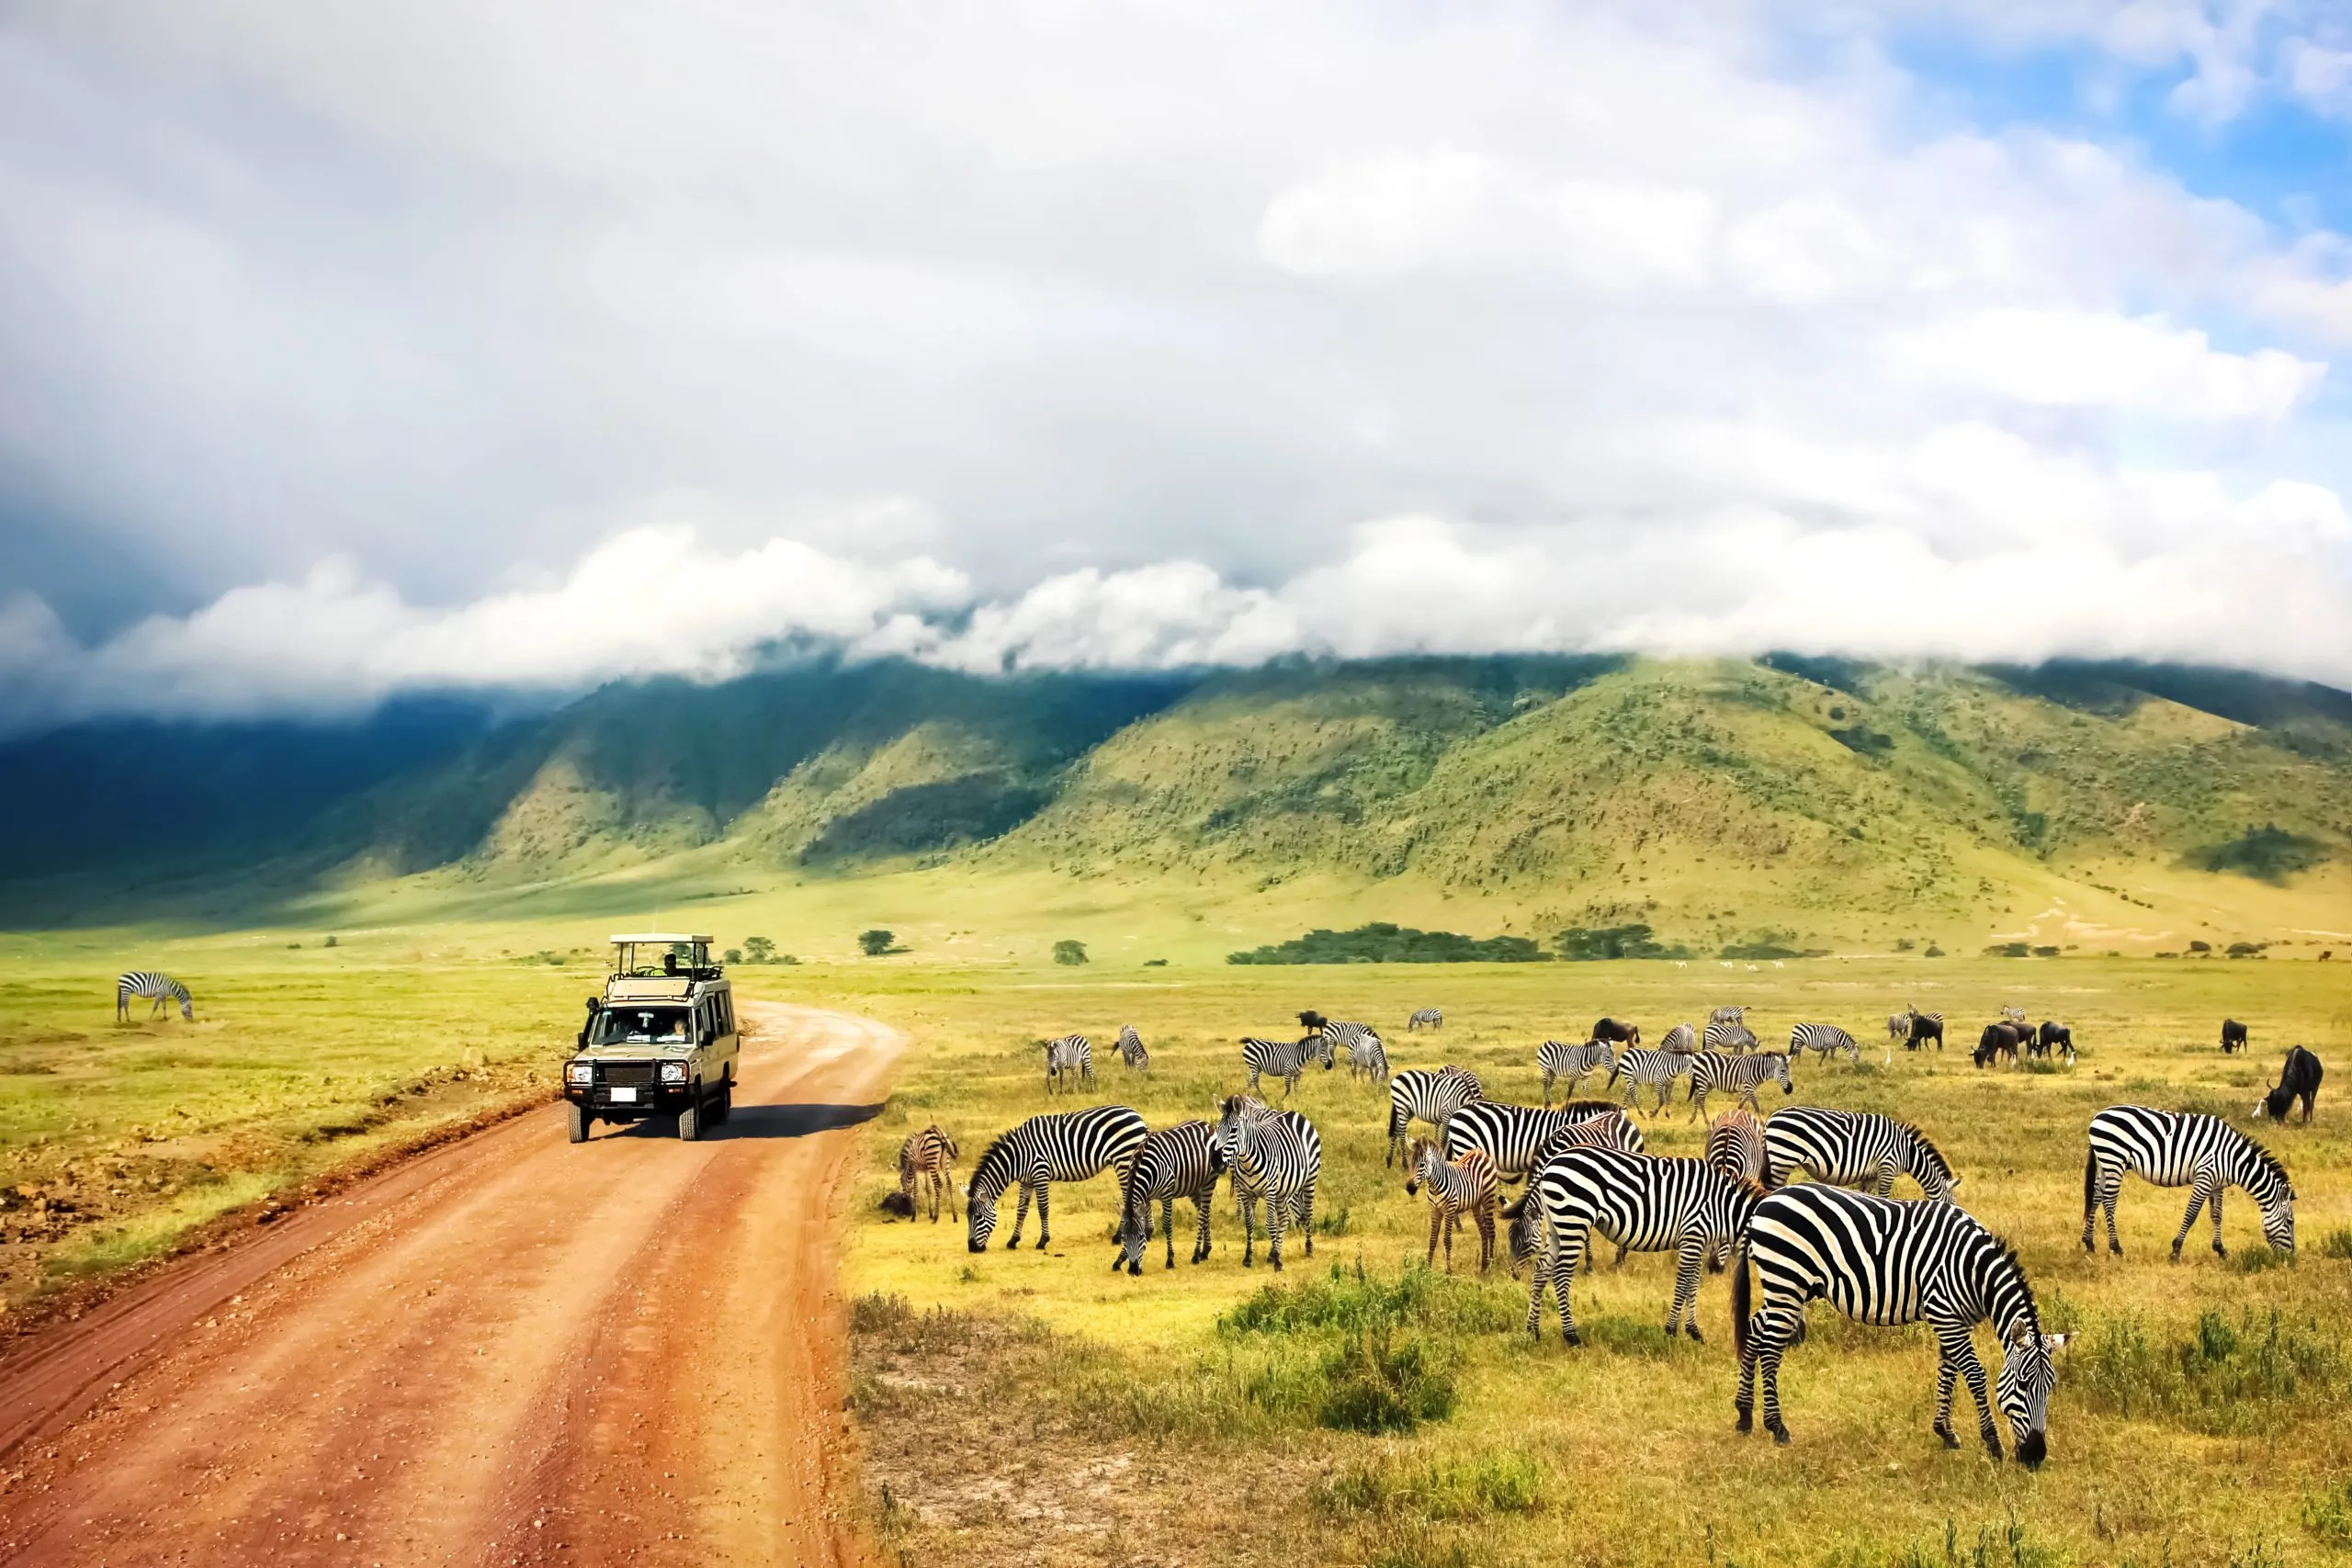 Wild nature of Africa. Zebras against mountains and clouds. Safari in Ngorongoro Crater National park. Tanzania.